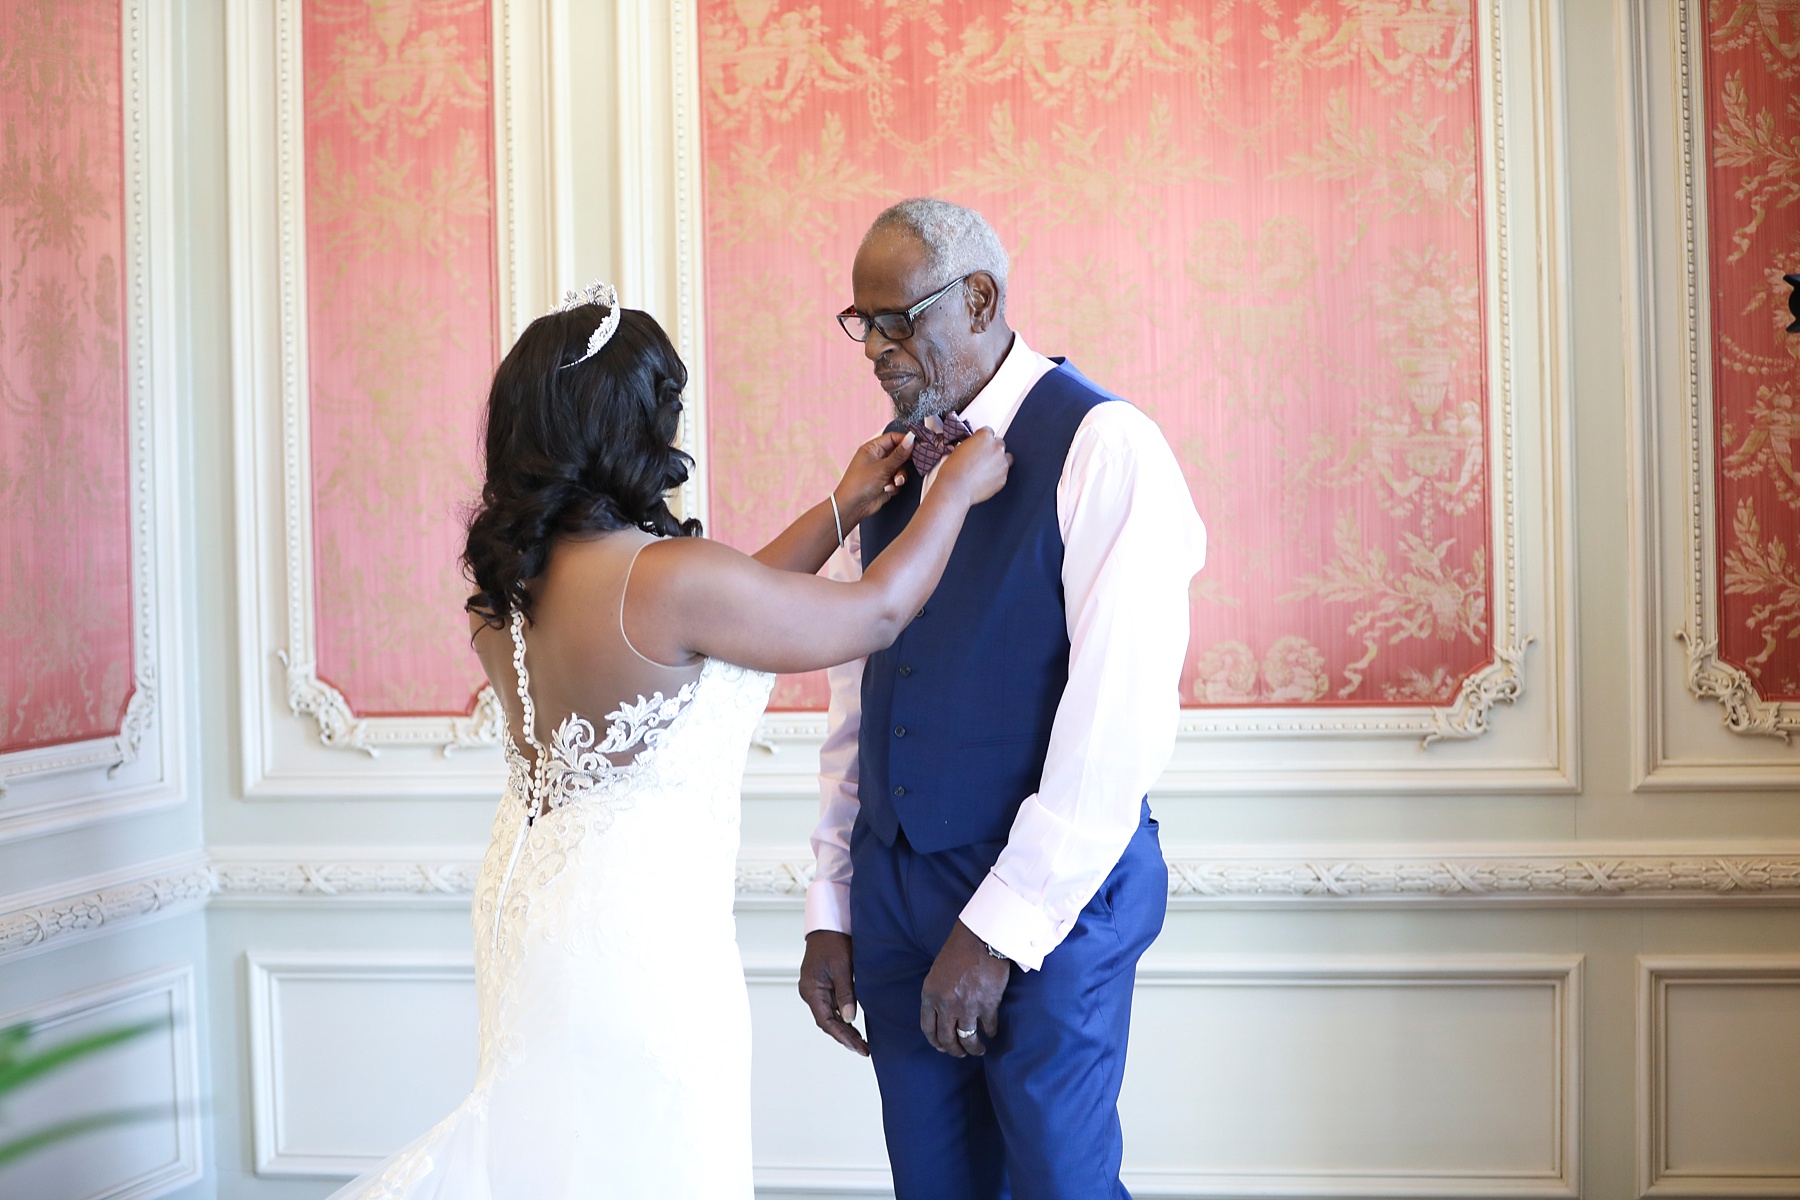 The Olana wedding day photographed by Randi Michelle Weddings